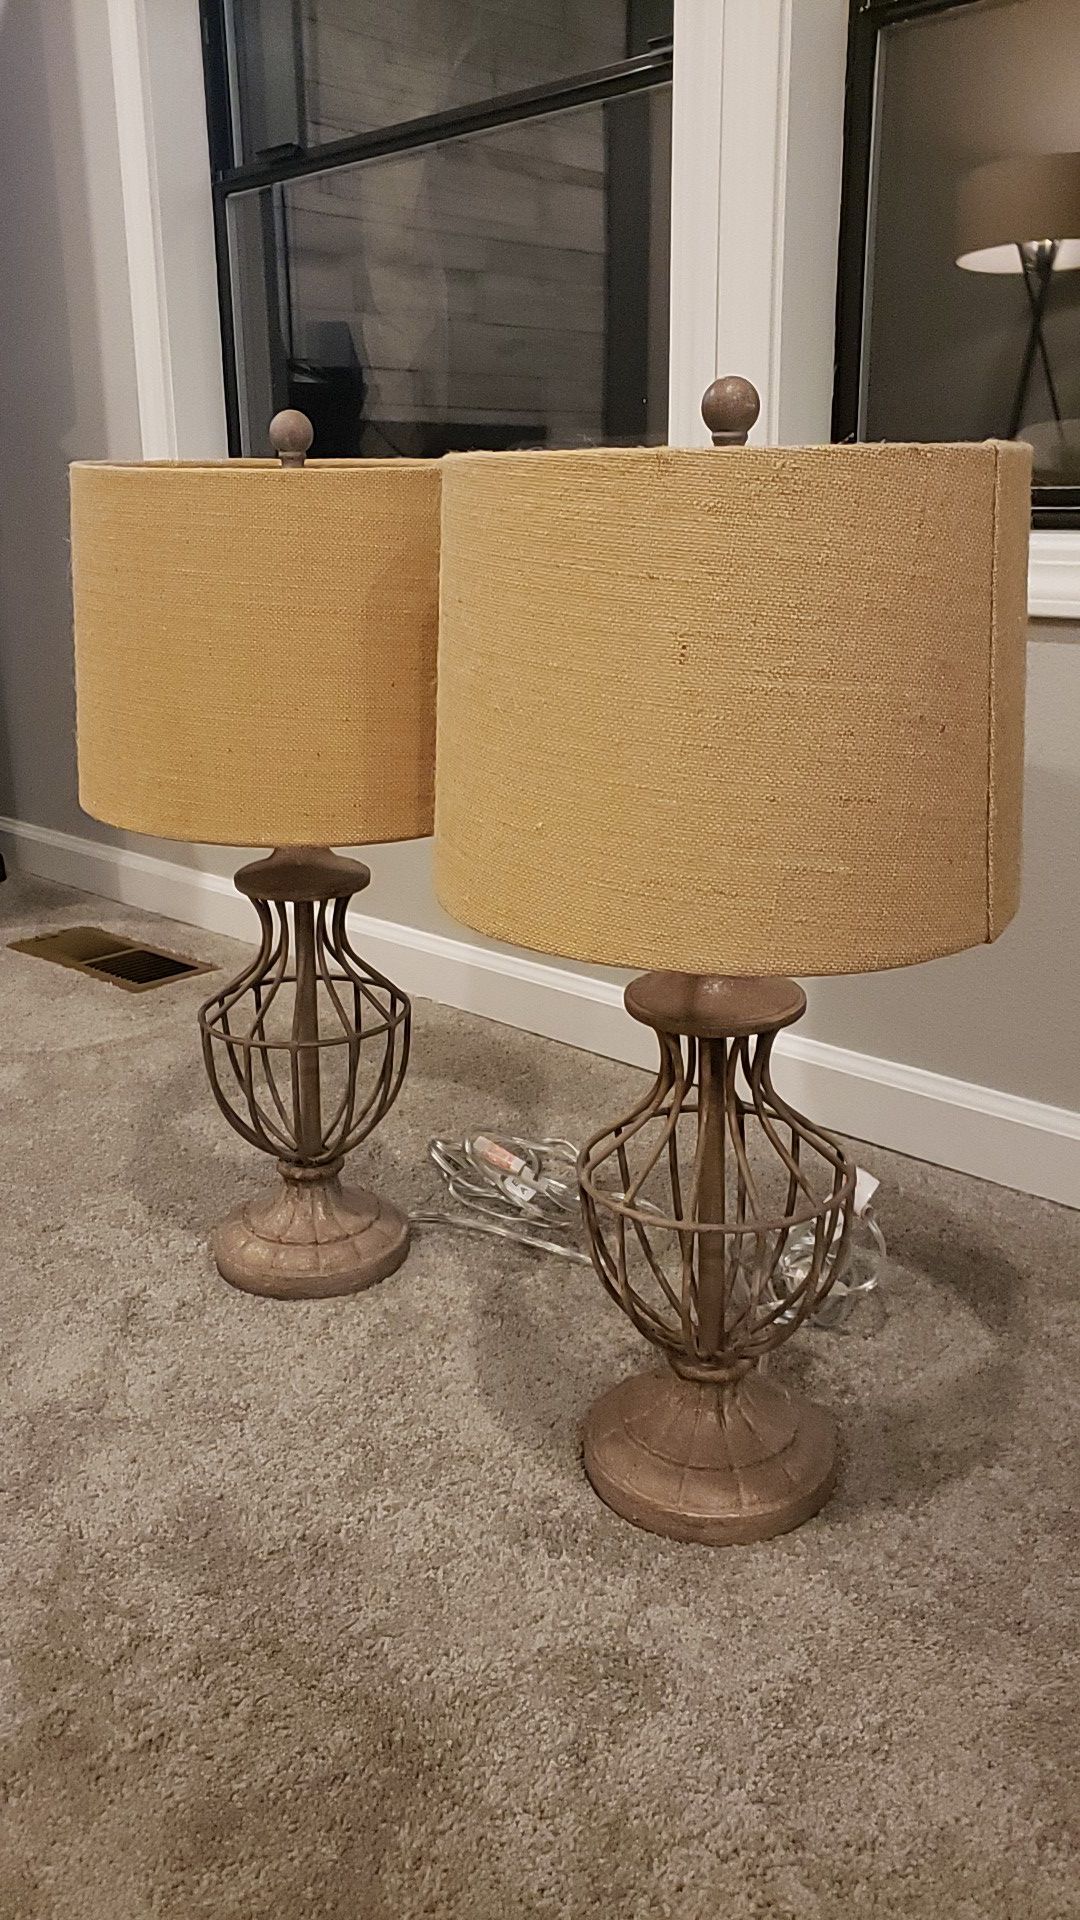 Two rustic table lamps